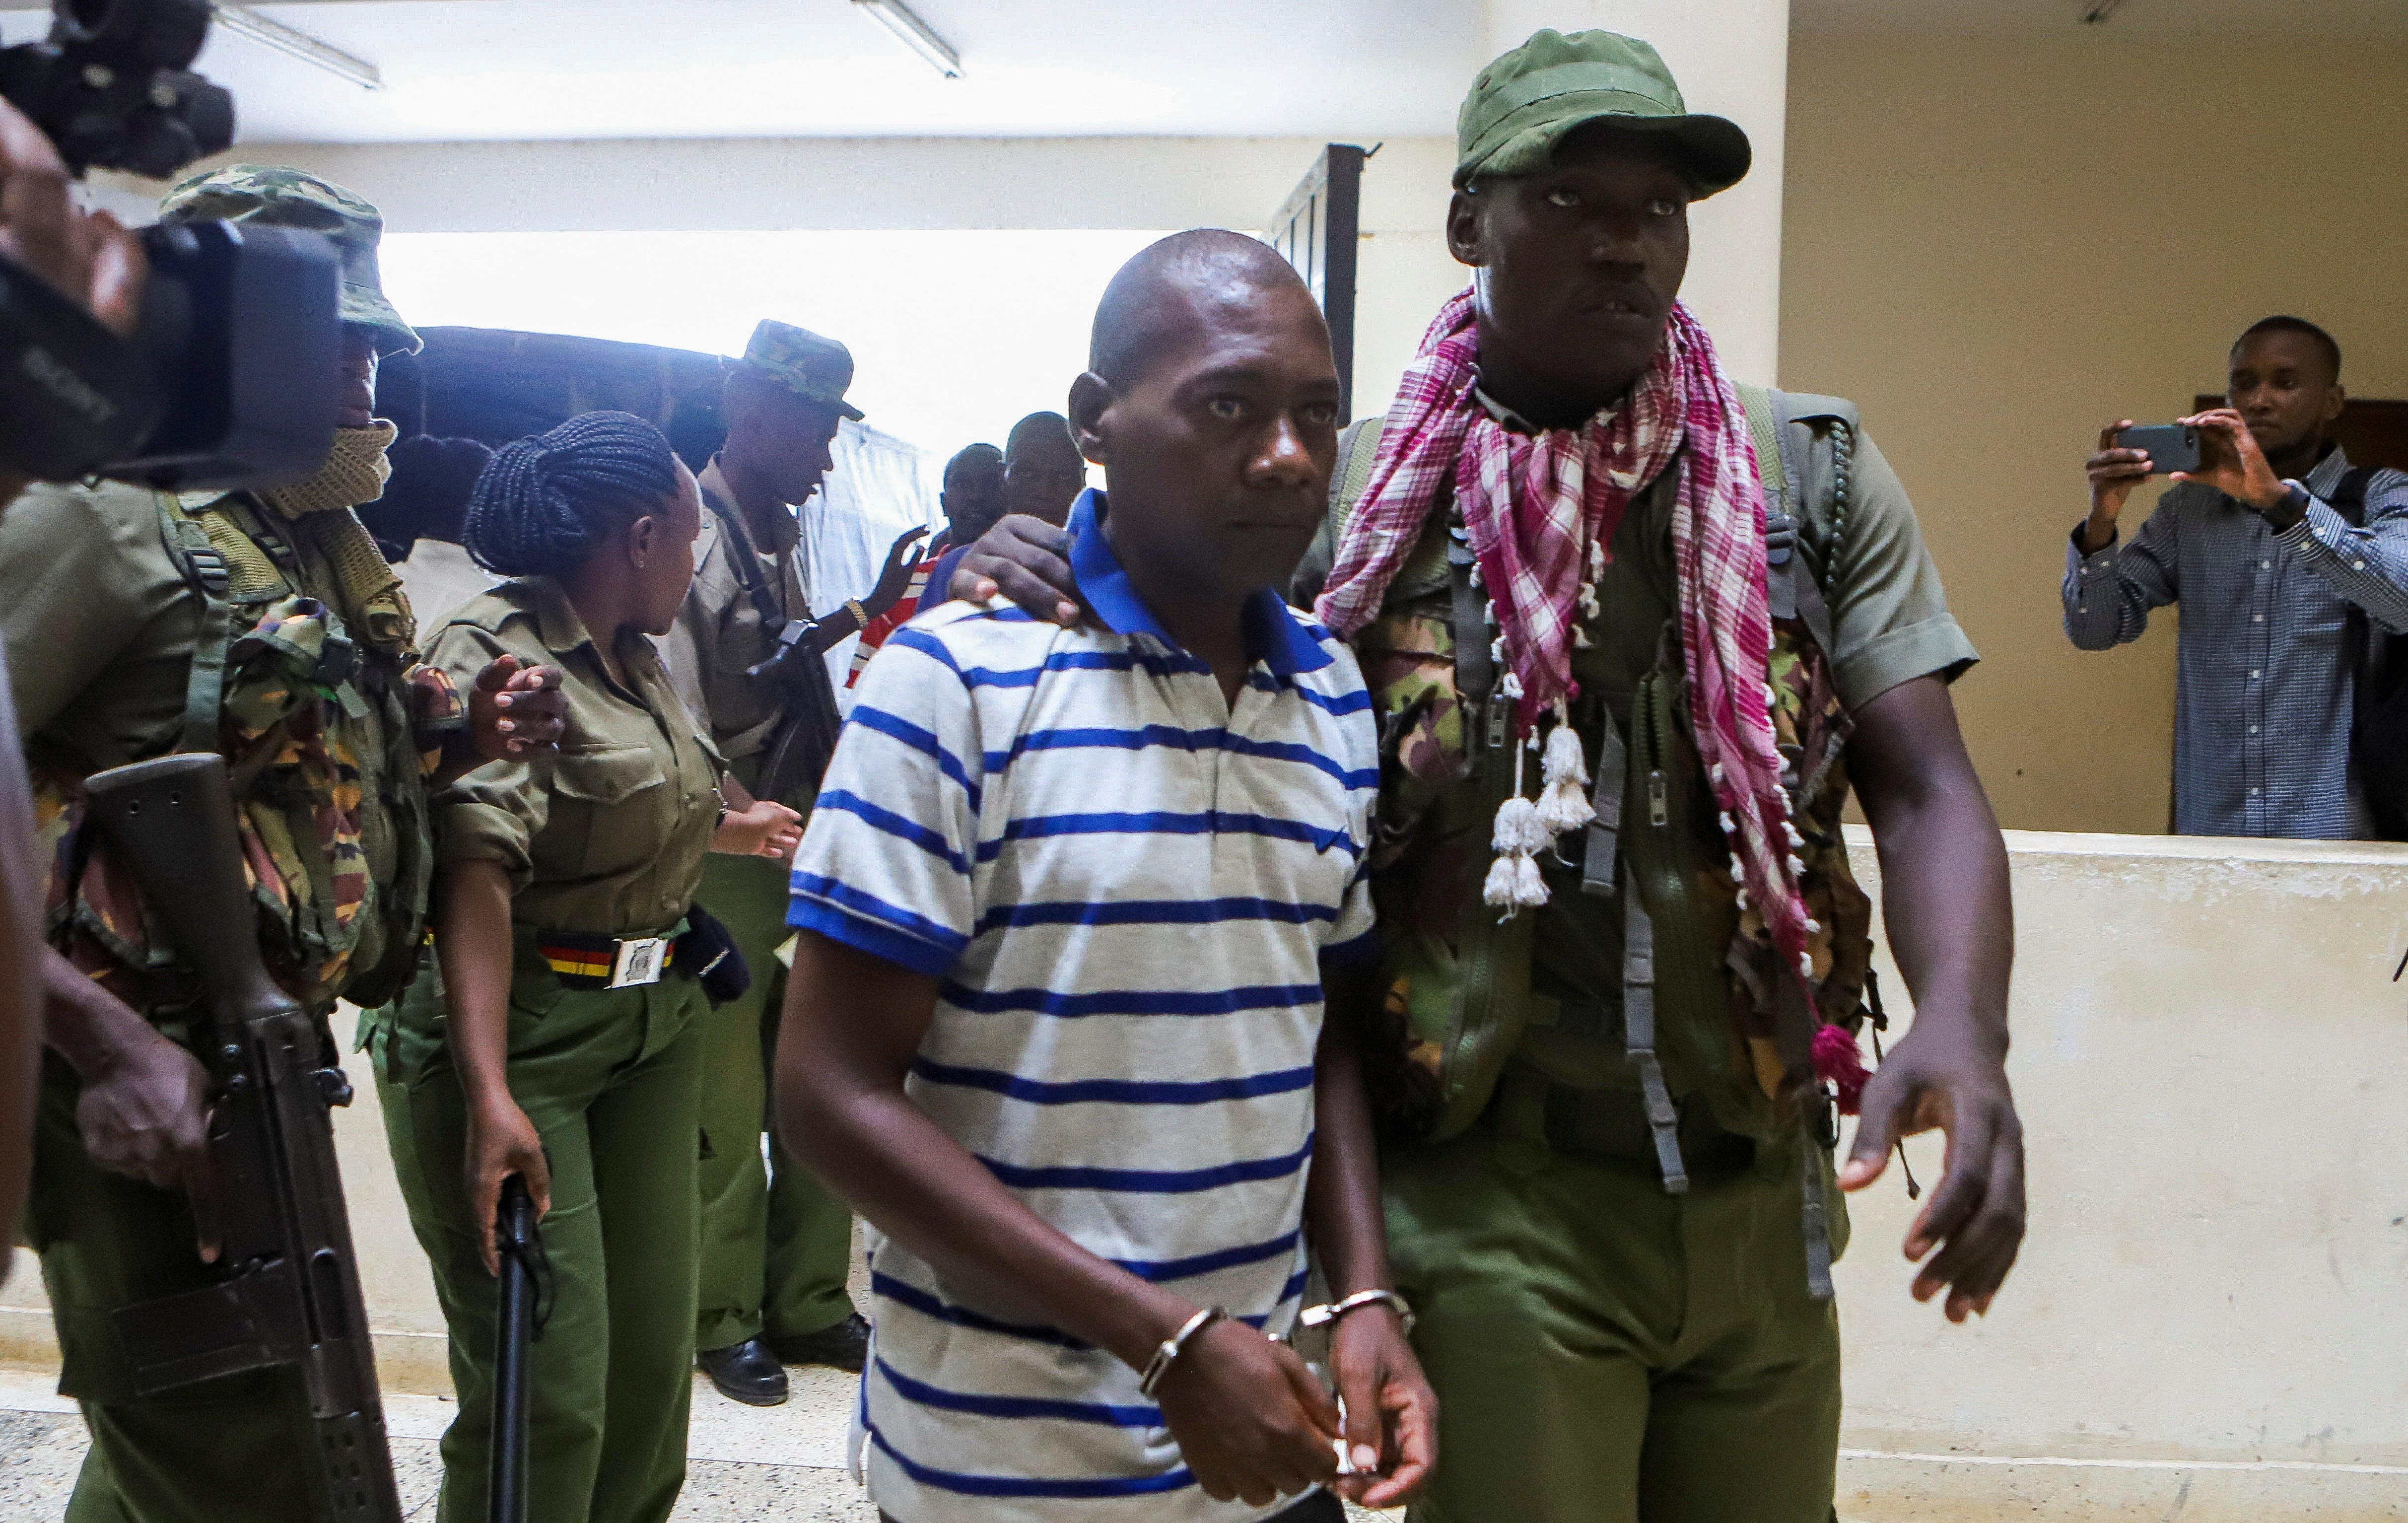 Paul Mackenzie, a Kenyan cult leader accused of ordering his followers, is escorted to the Malindi Law Courts